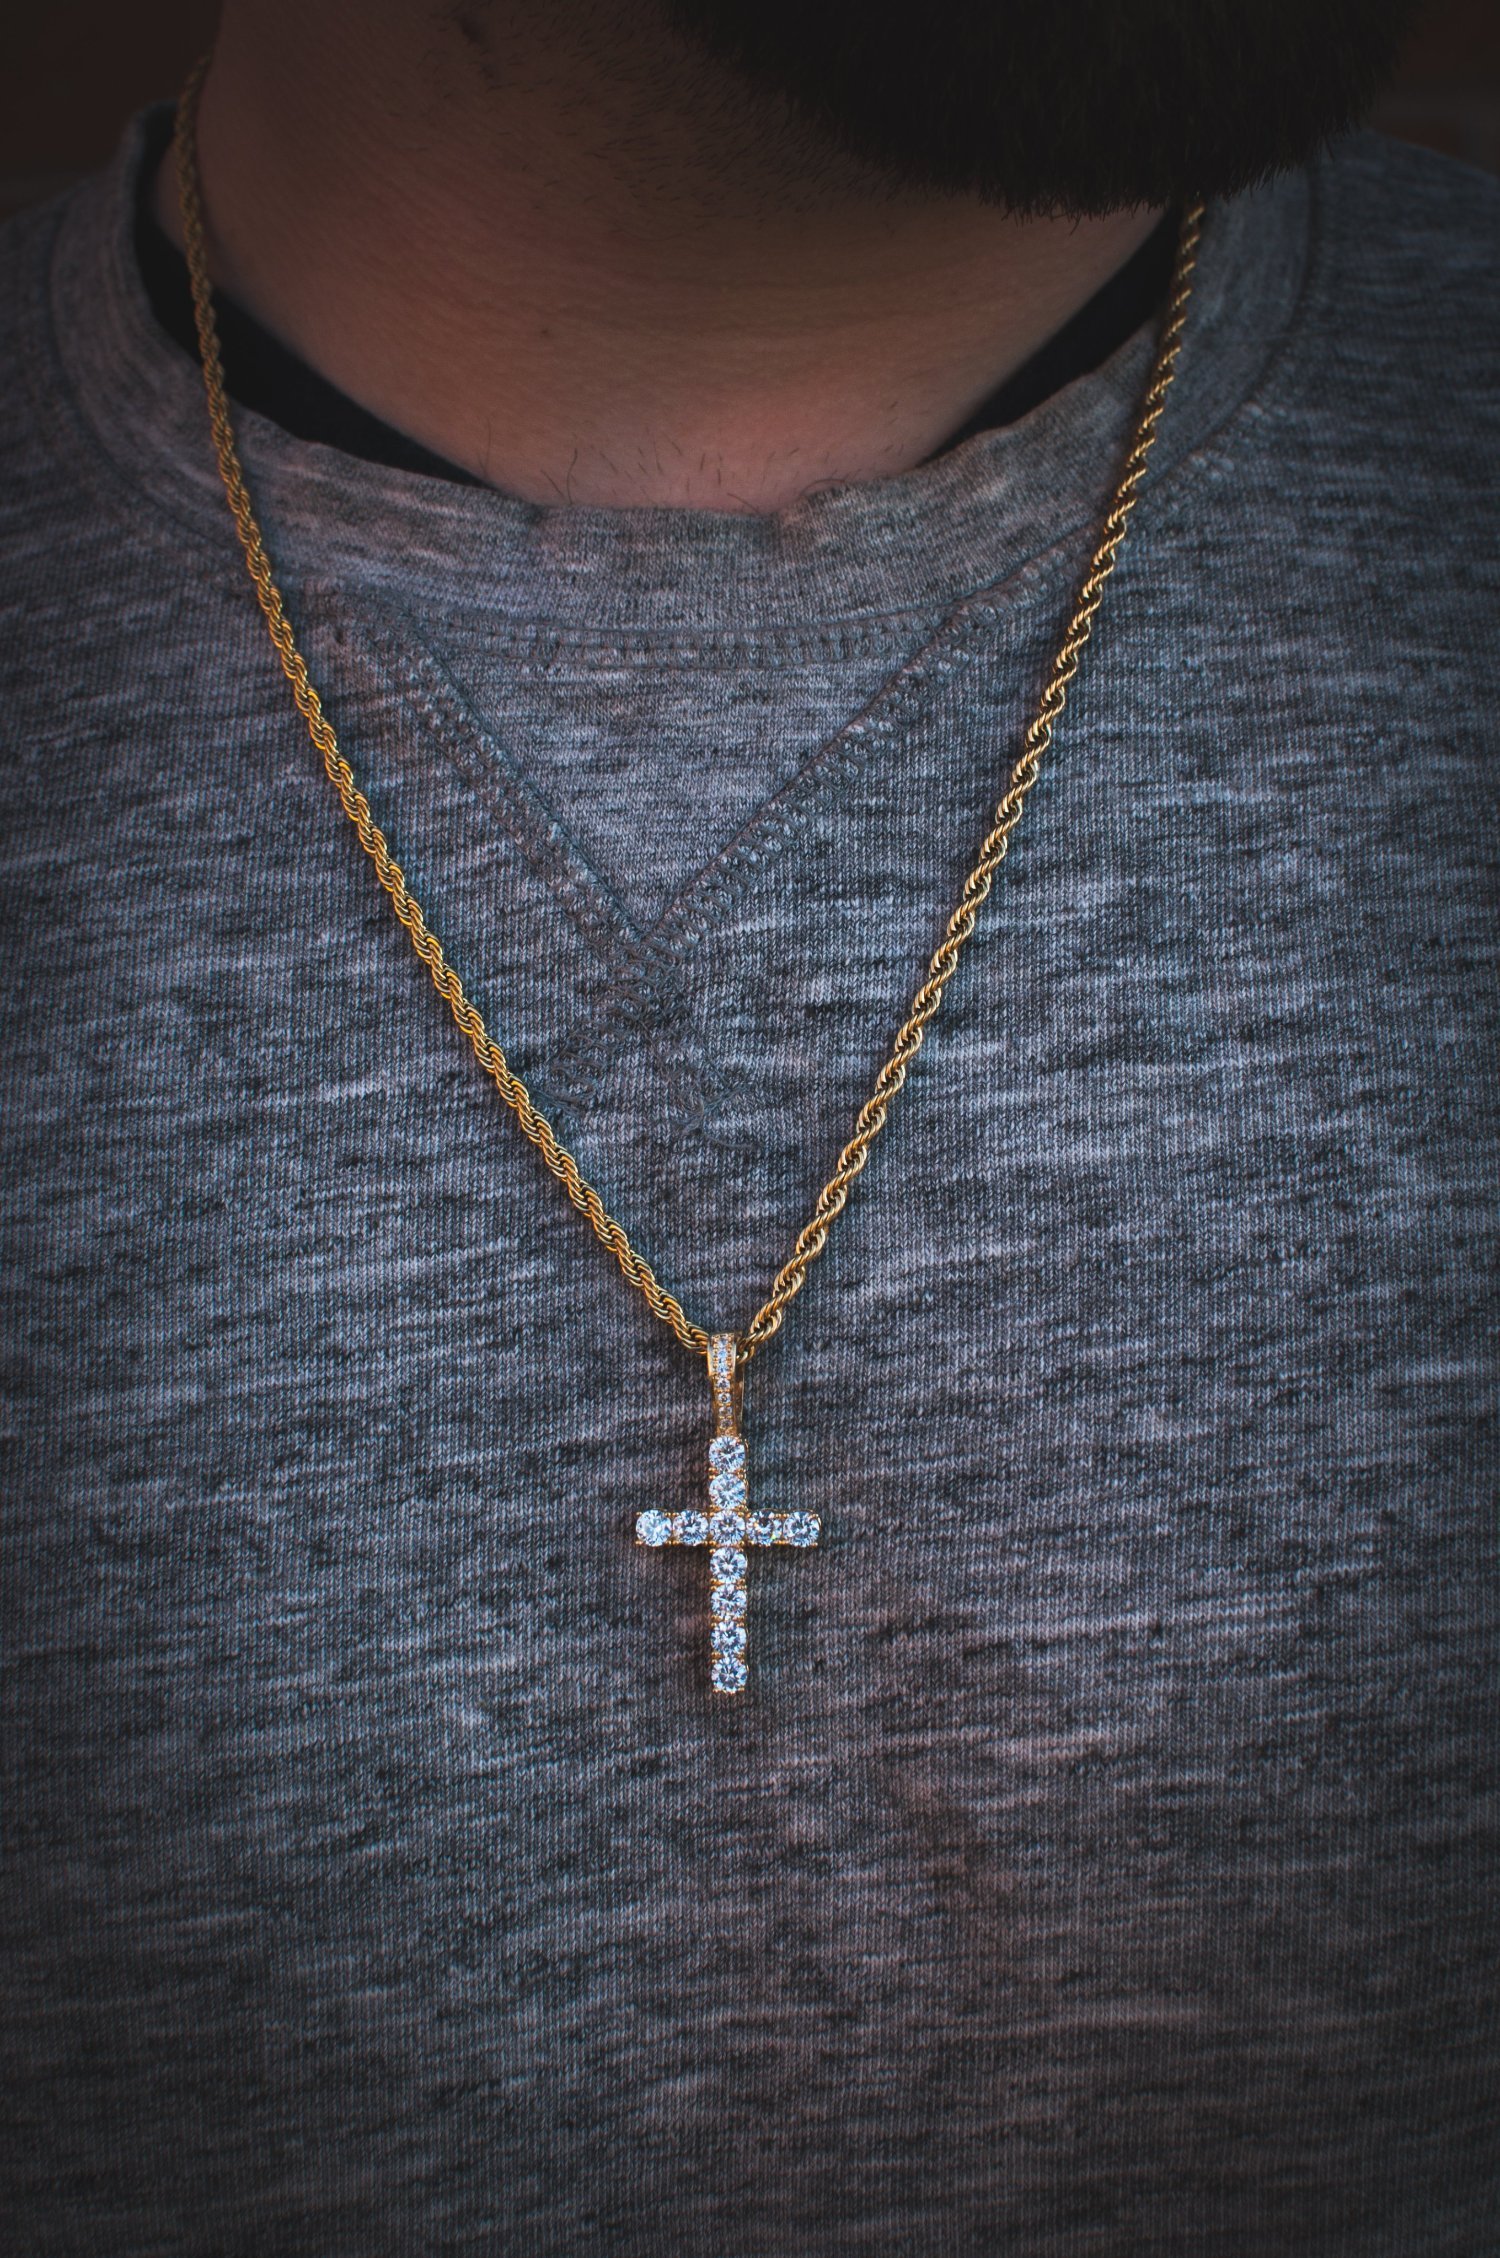 4mm Diamond Cross Necklace in Yellow/White Gold - The Jewelry Plug